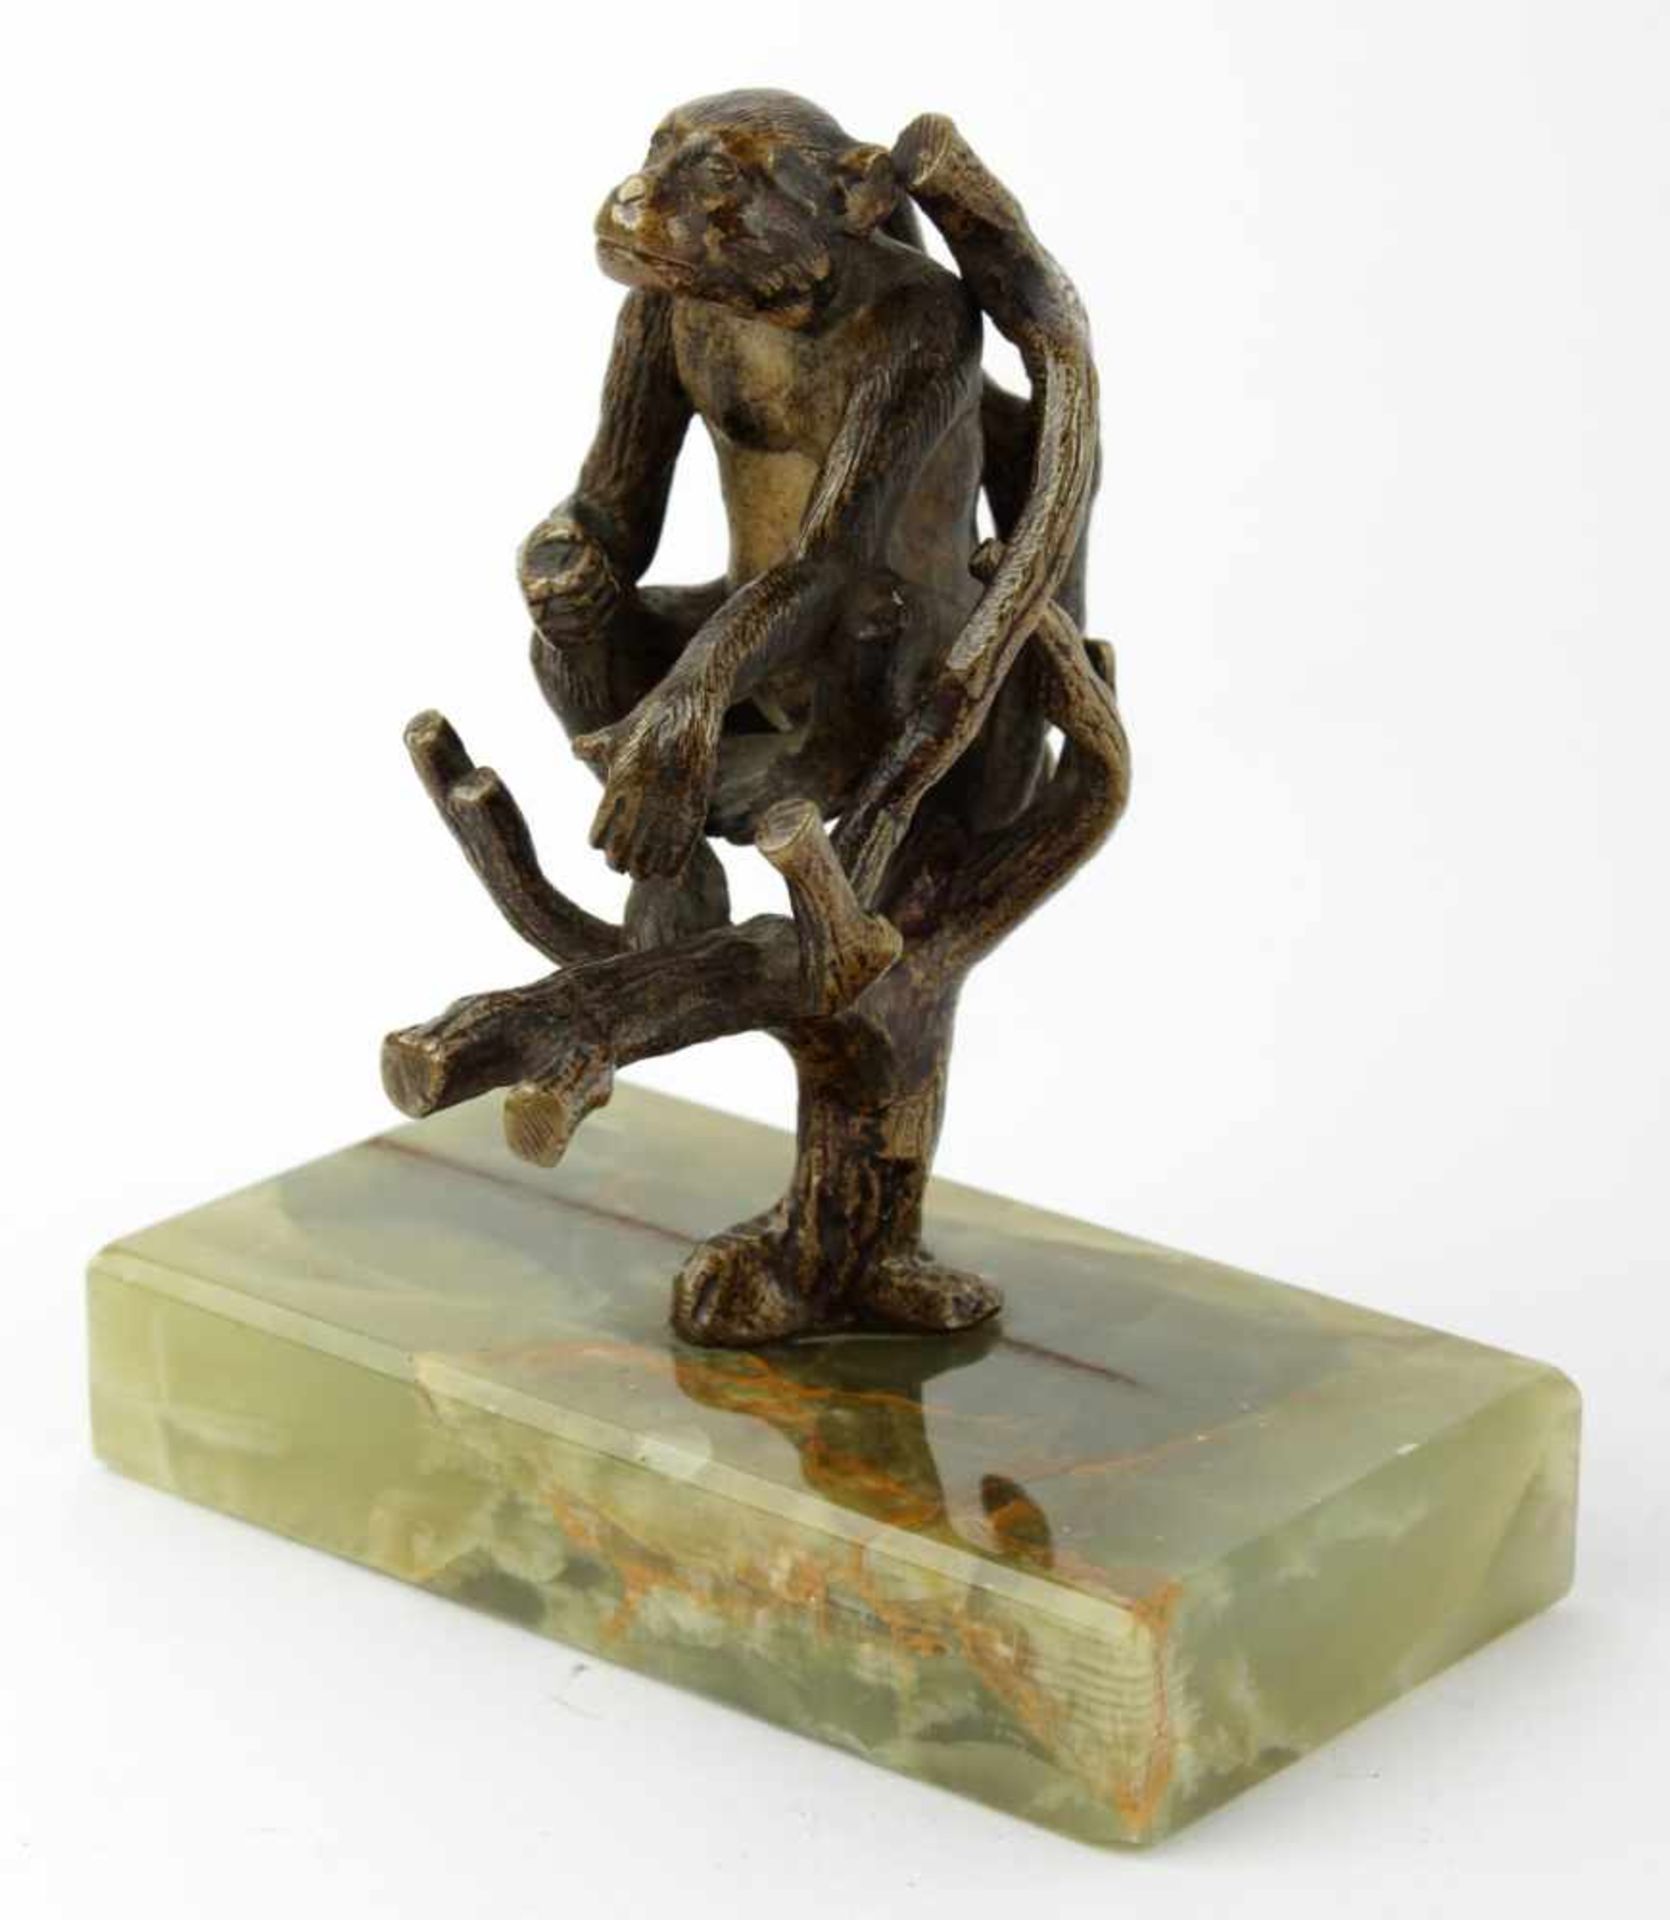 Bronze sculpture - monkey 1st half of the 20th century, bronze, patina, on the onyx base, overall